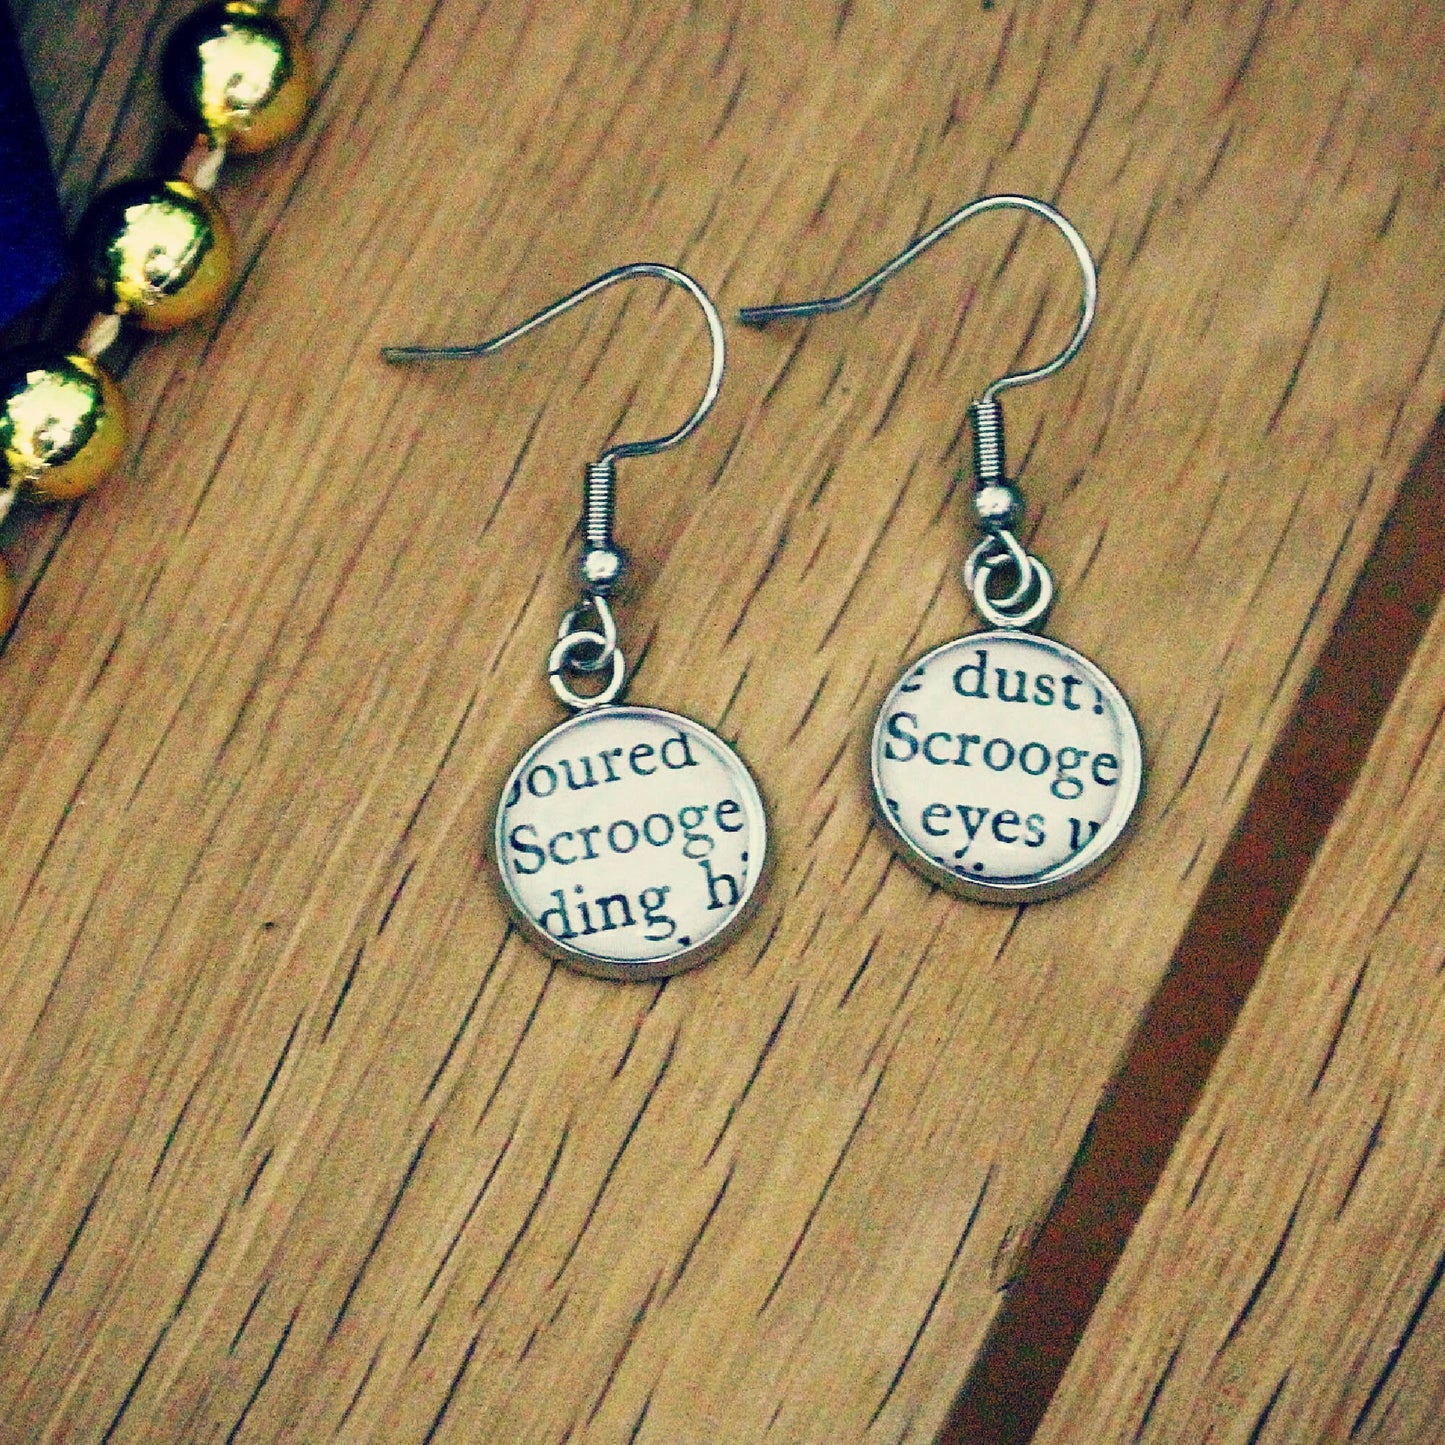 Scrooge earrings! Christmas Carol recycled book gift. Grinch. Ebenezer. Muppets. Charles Dickens. Novelty Xmas gift for her. Bah Humbug!